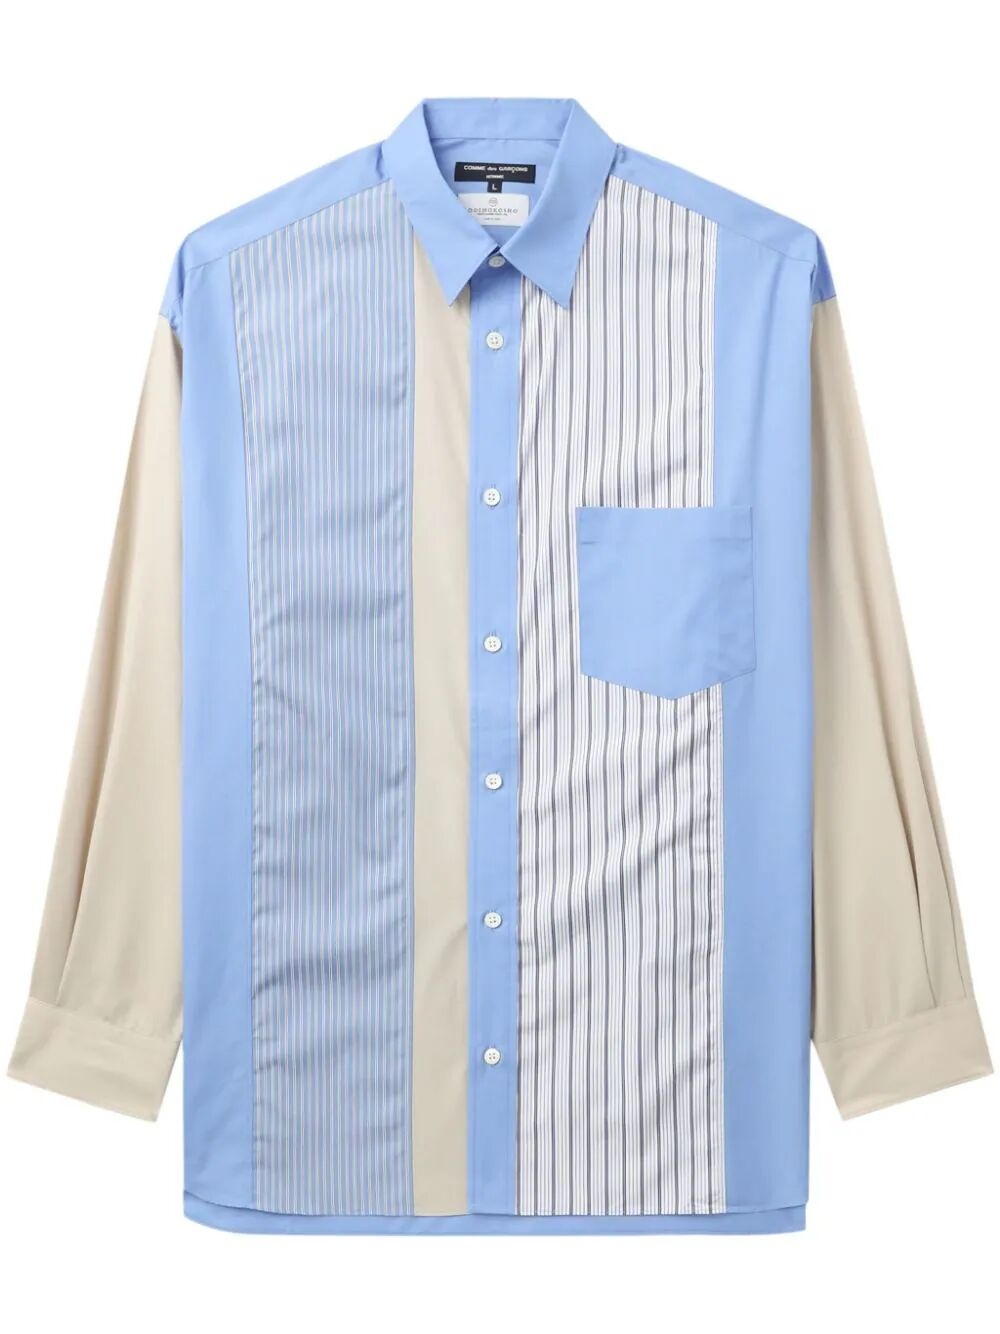 STRIPED SHIRT WITH PATCH - 4